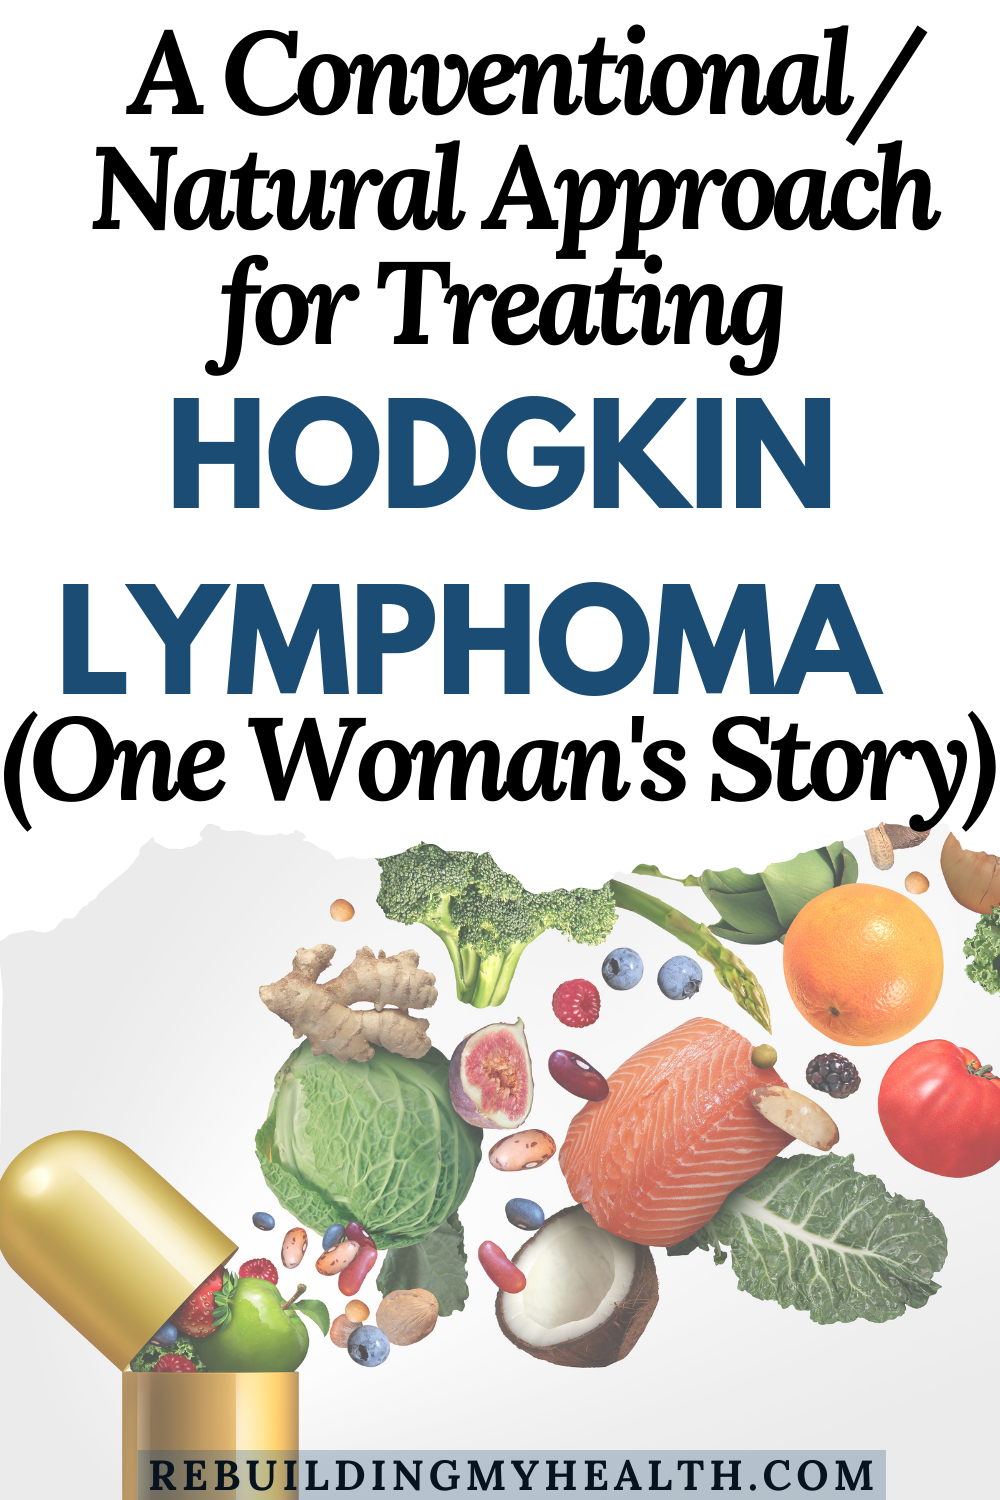 An Ohio woman combined conventional chemotherapy and natural approaches to heal Hodgkin lymphoma and reduce the side effects of chemo.